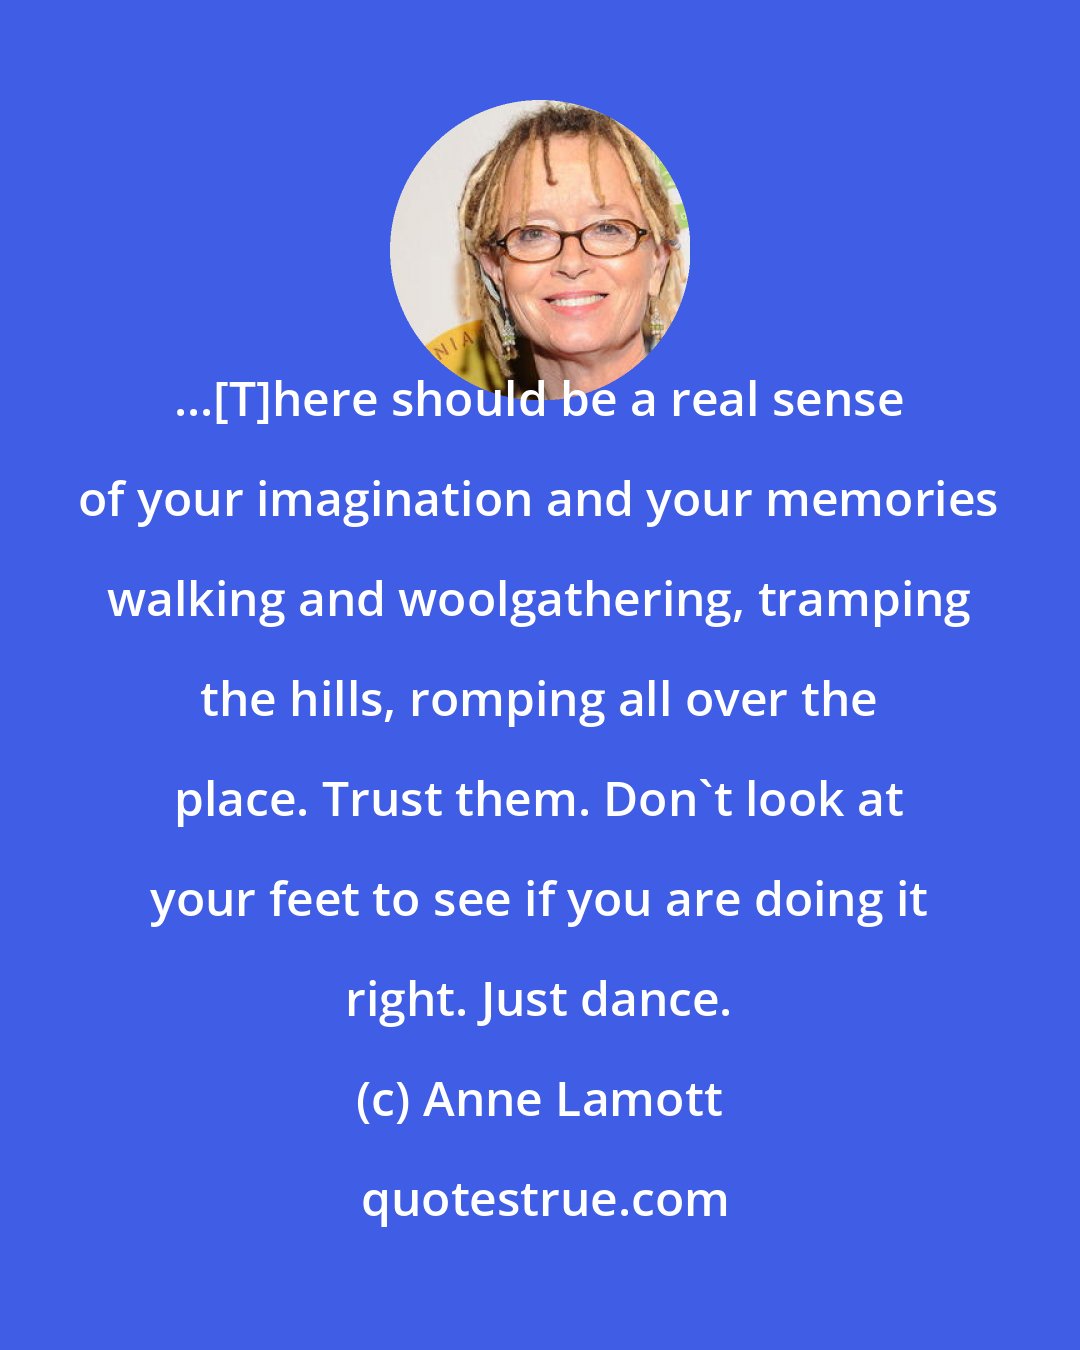 Anne Lamott: ...[T]here should be a real sense of your imagination and your memories walking and woolgathering, tramping the hills, romping all over the place. Trust them. Don't look at your feet to see if you are doing it right. Just dance.